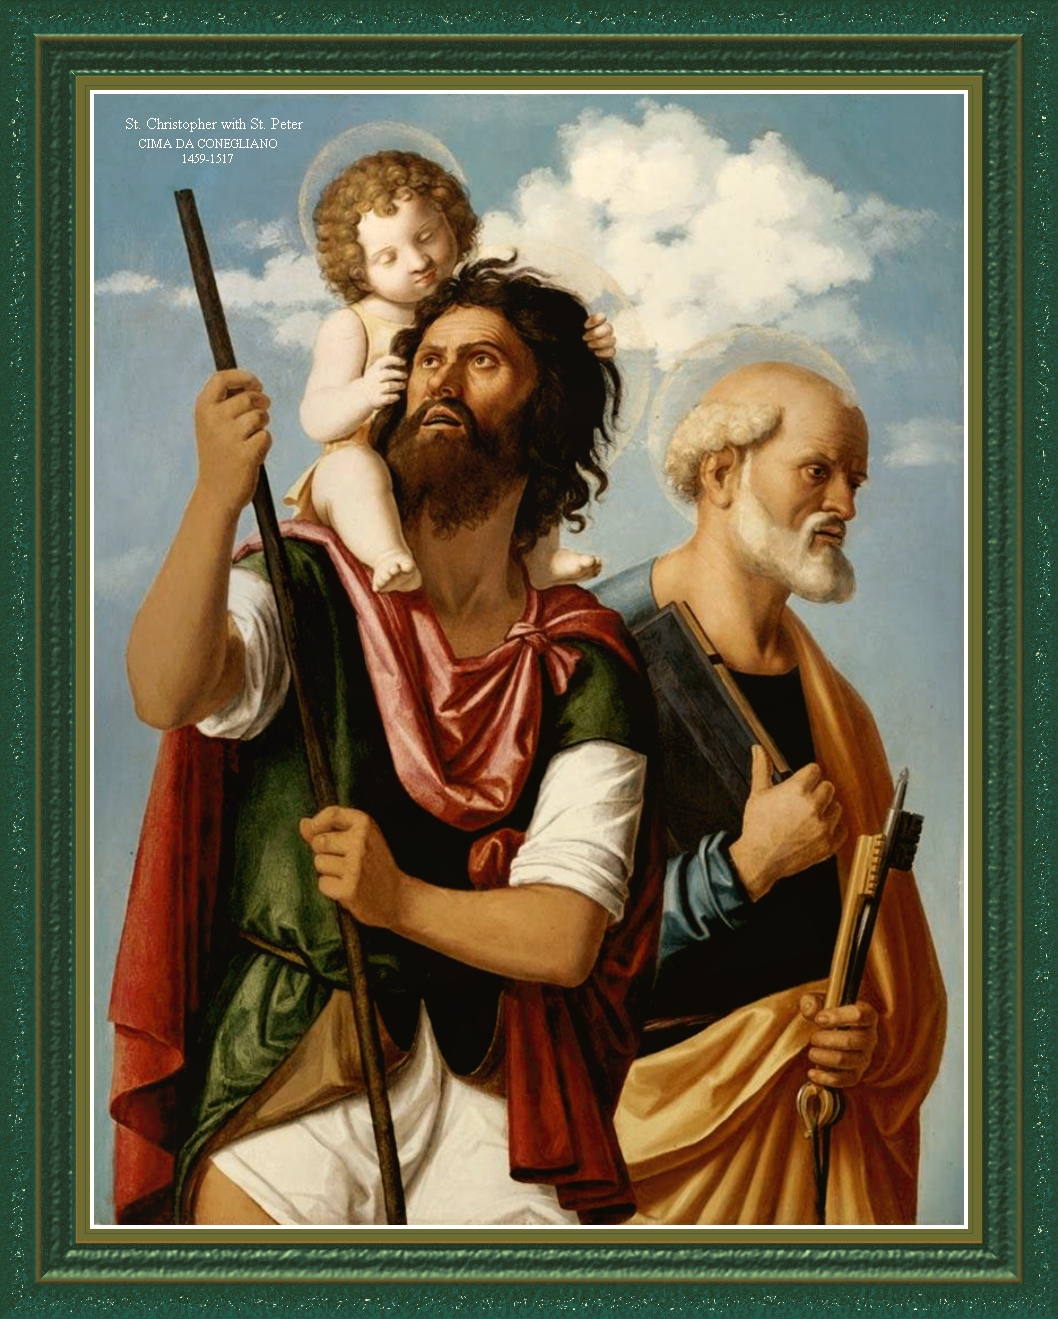 ST. CHRISTOPHER WITH ST. PETER